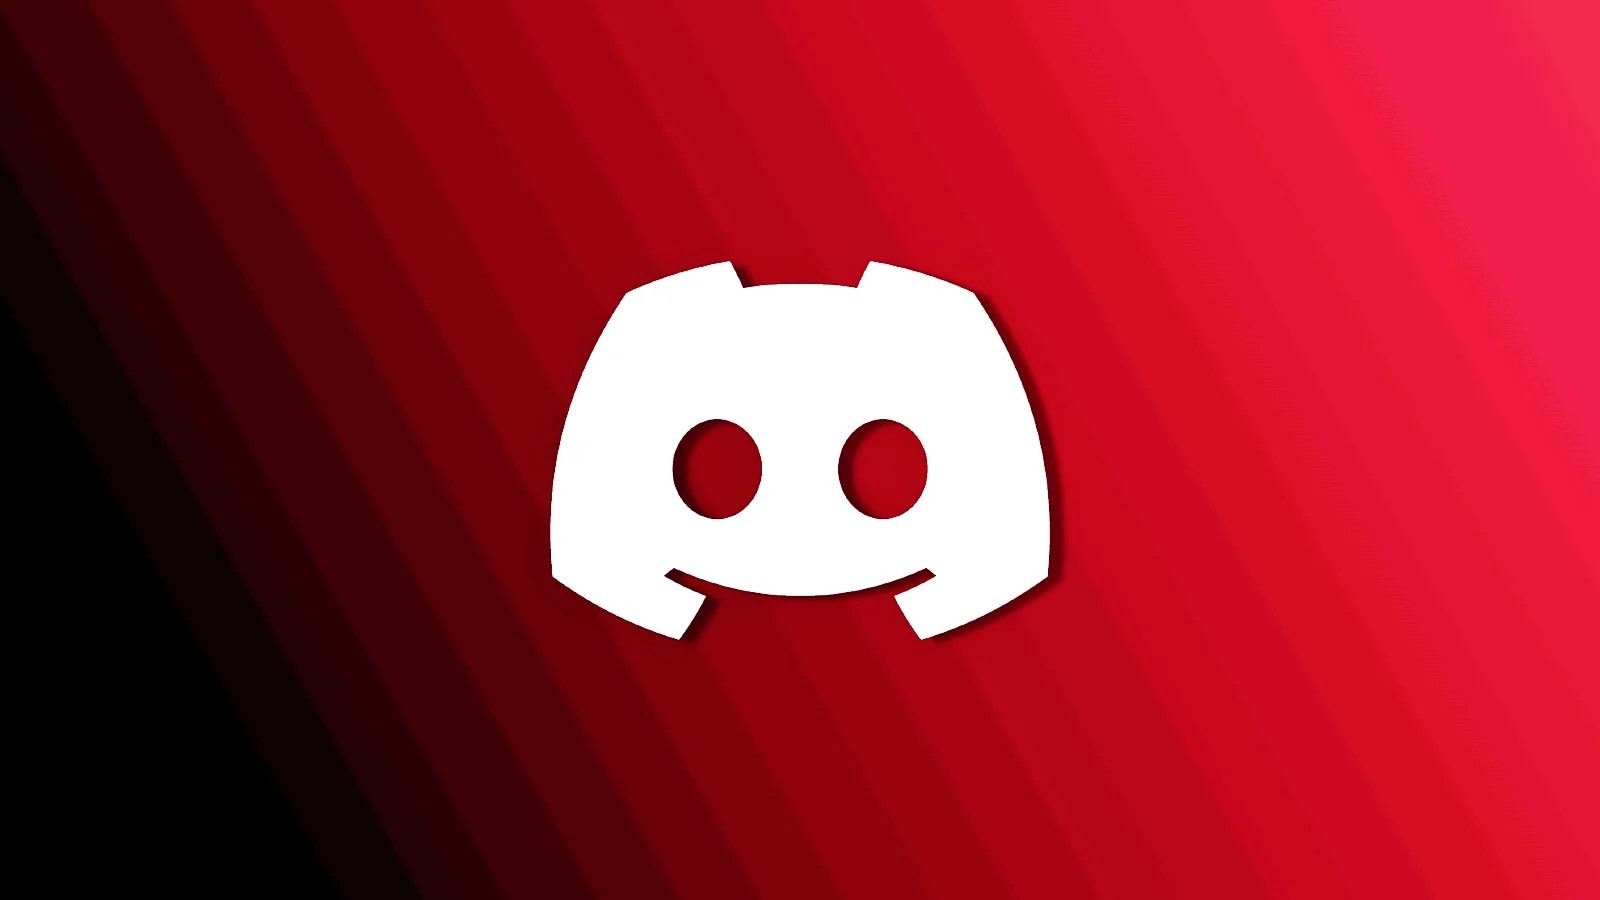 alt=Discord logo: white face, red eyes, red and black background.